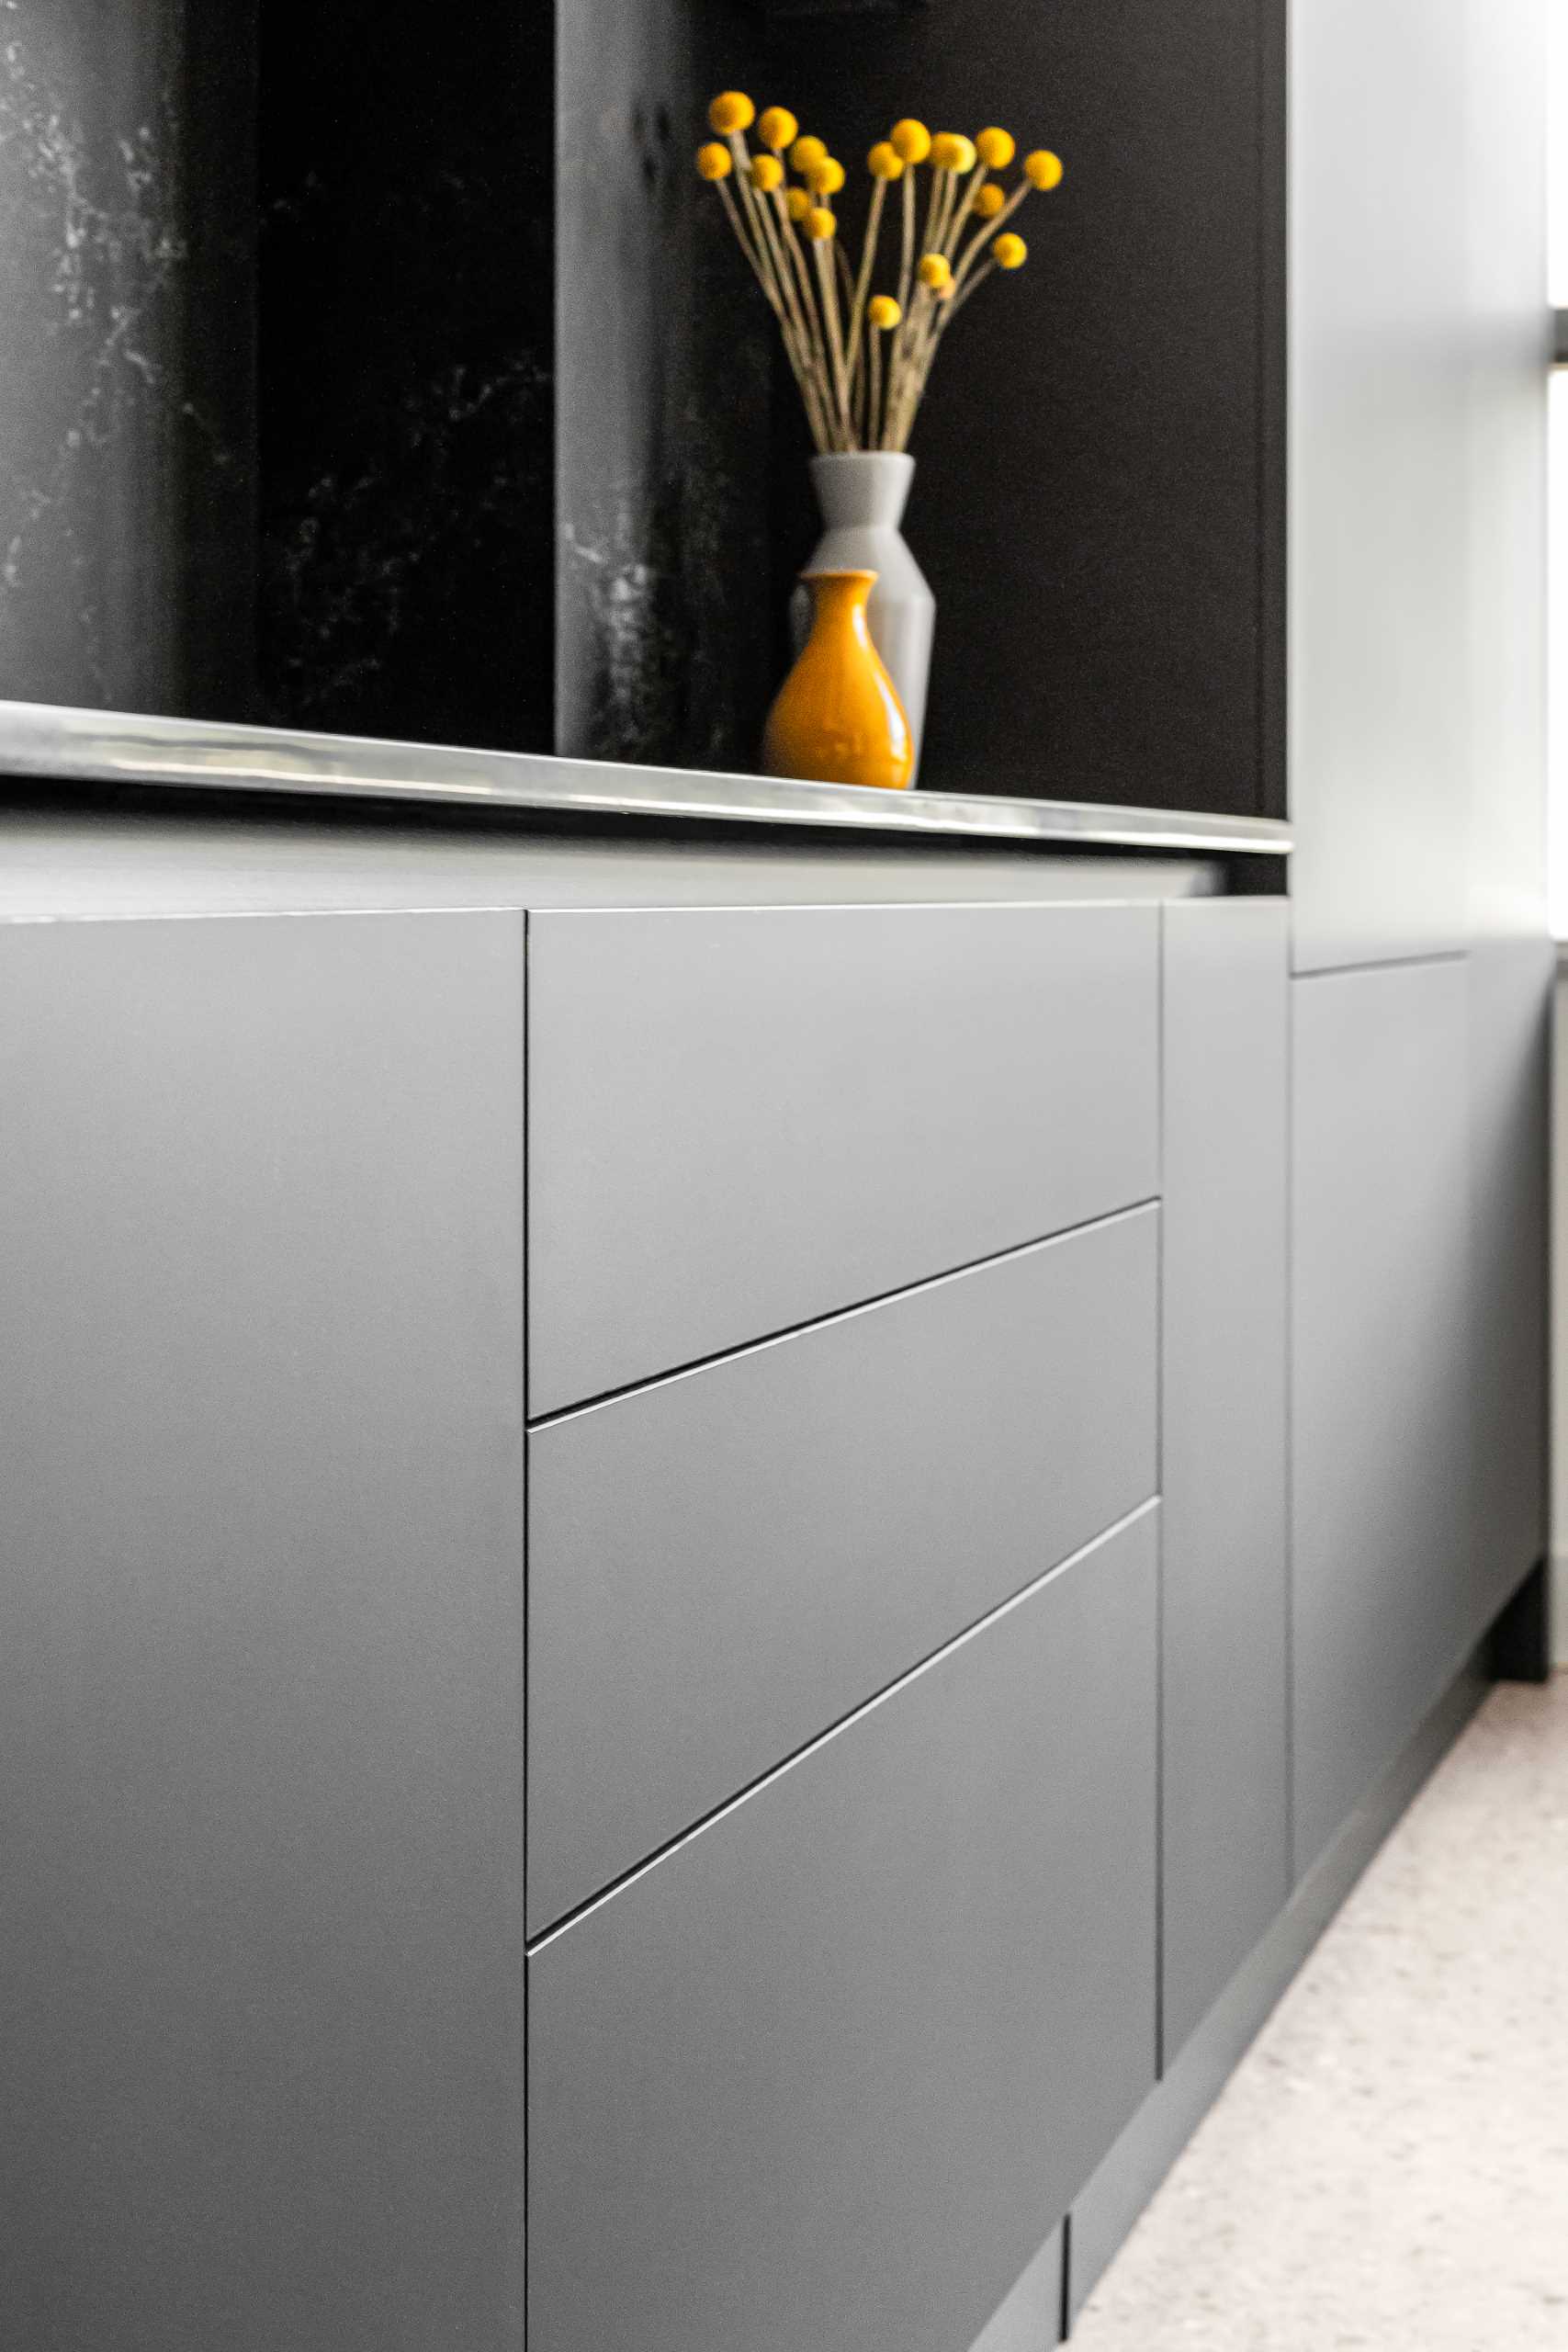 A modern kitchen with a white stone island with subtle veins and minimalist hardware-free black cabinets.